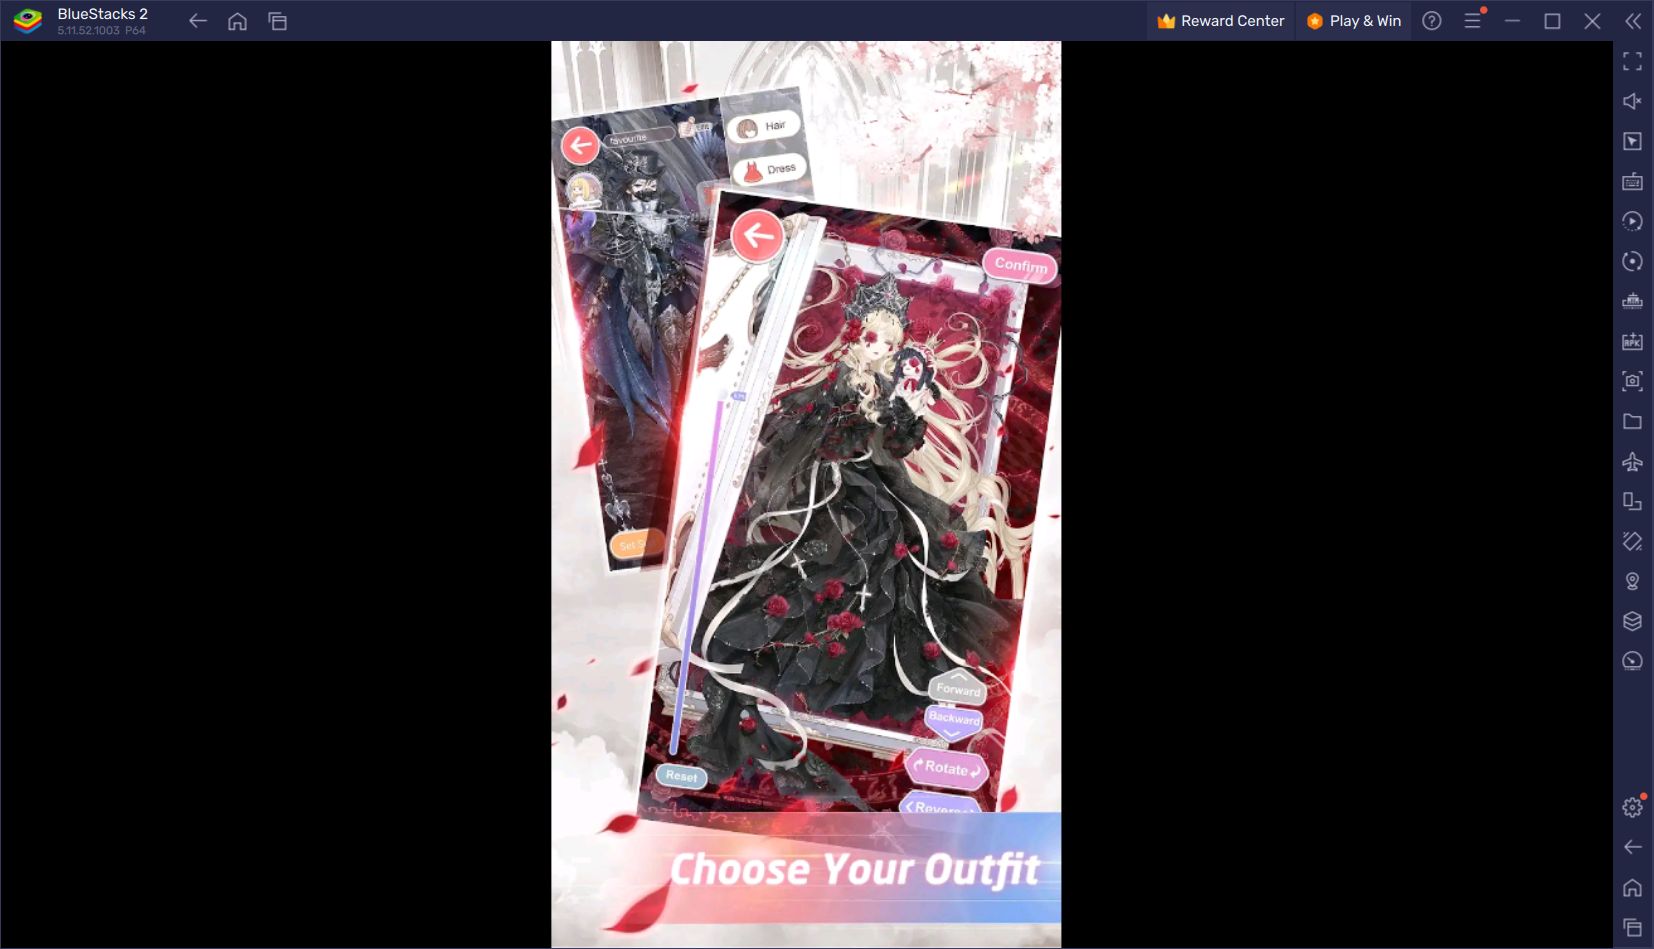 Create and Match Outfits in Love Nikki-Dress UP Queen on PC Using BlueStacks